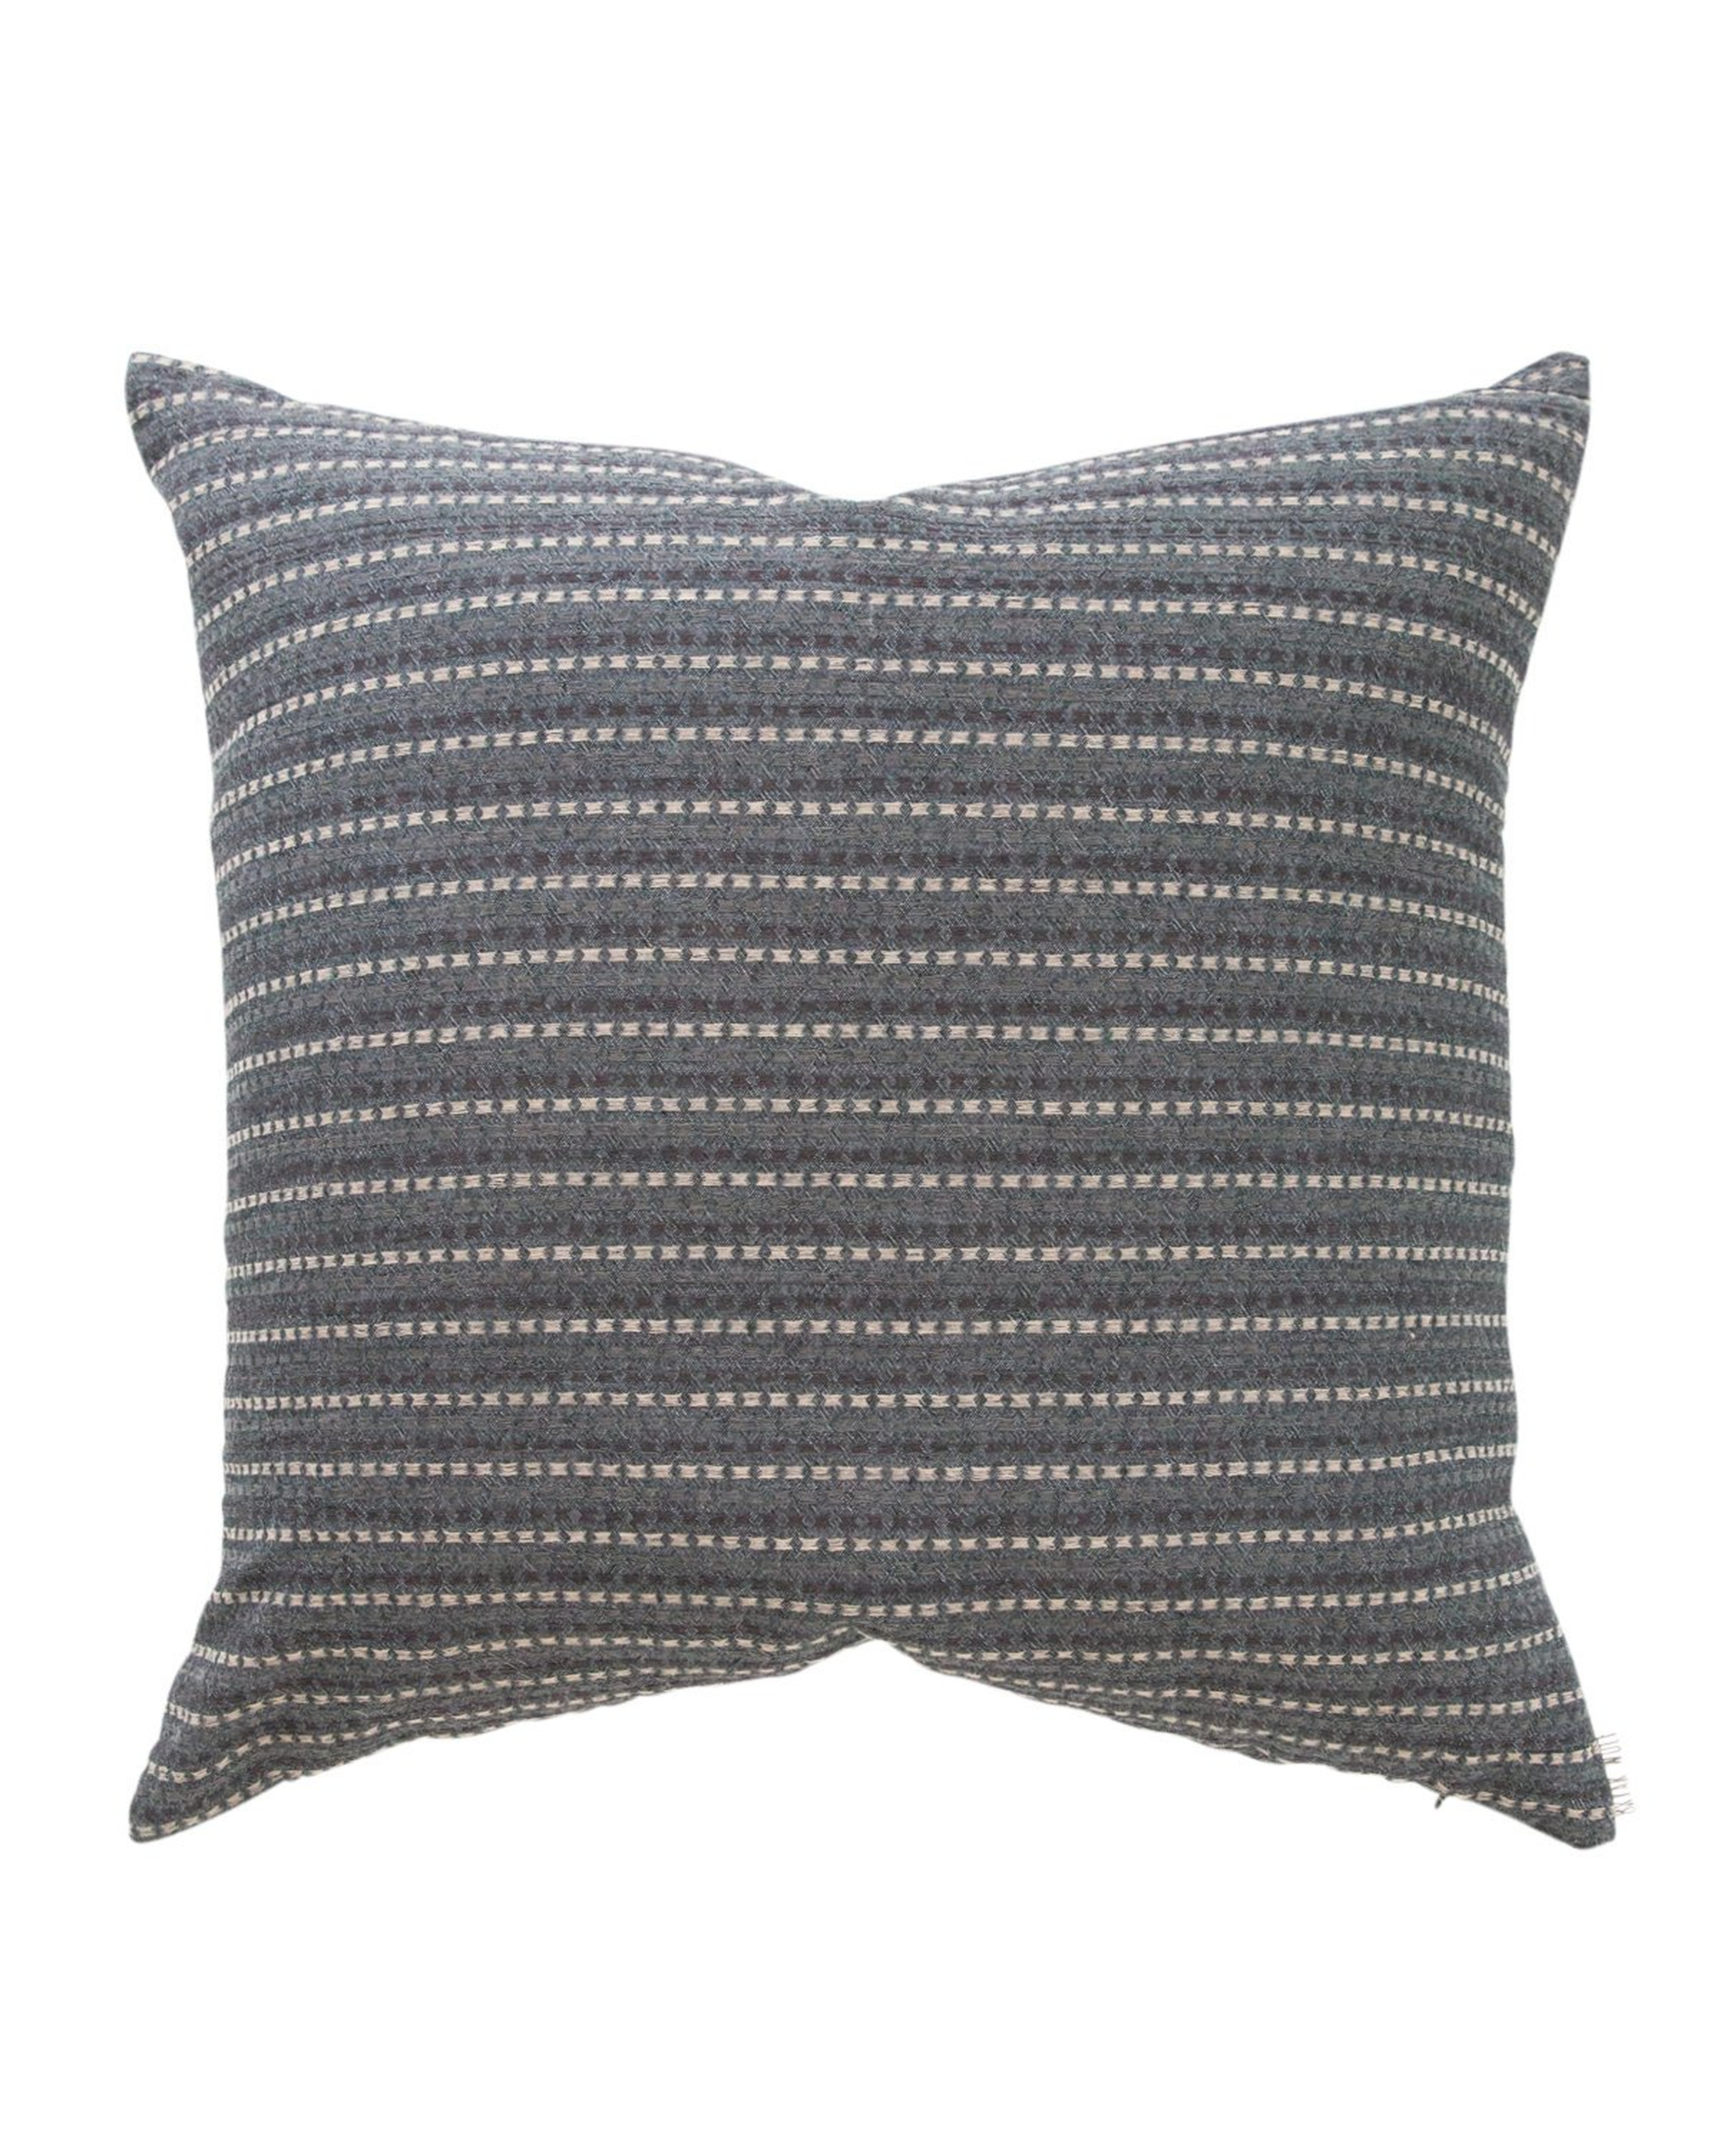 ISOLDA PILLOW with DOWN INSERT - 20" x 20" - McGee & Co.